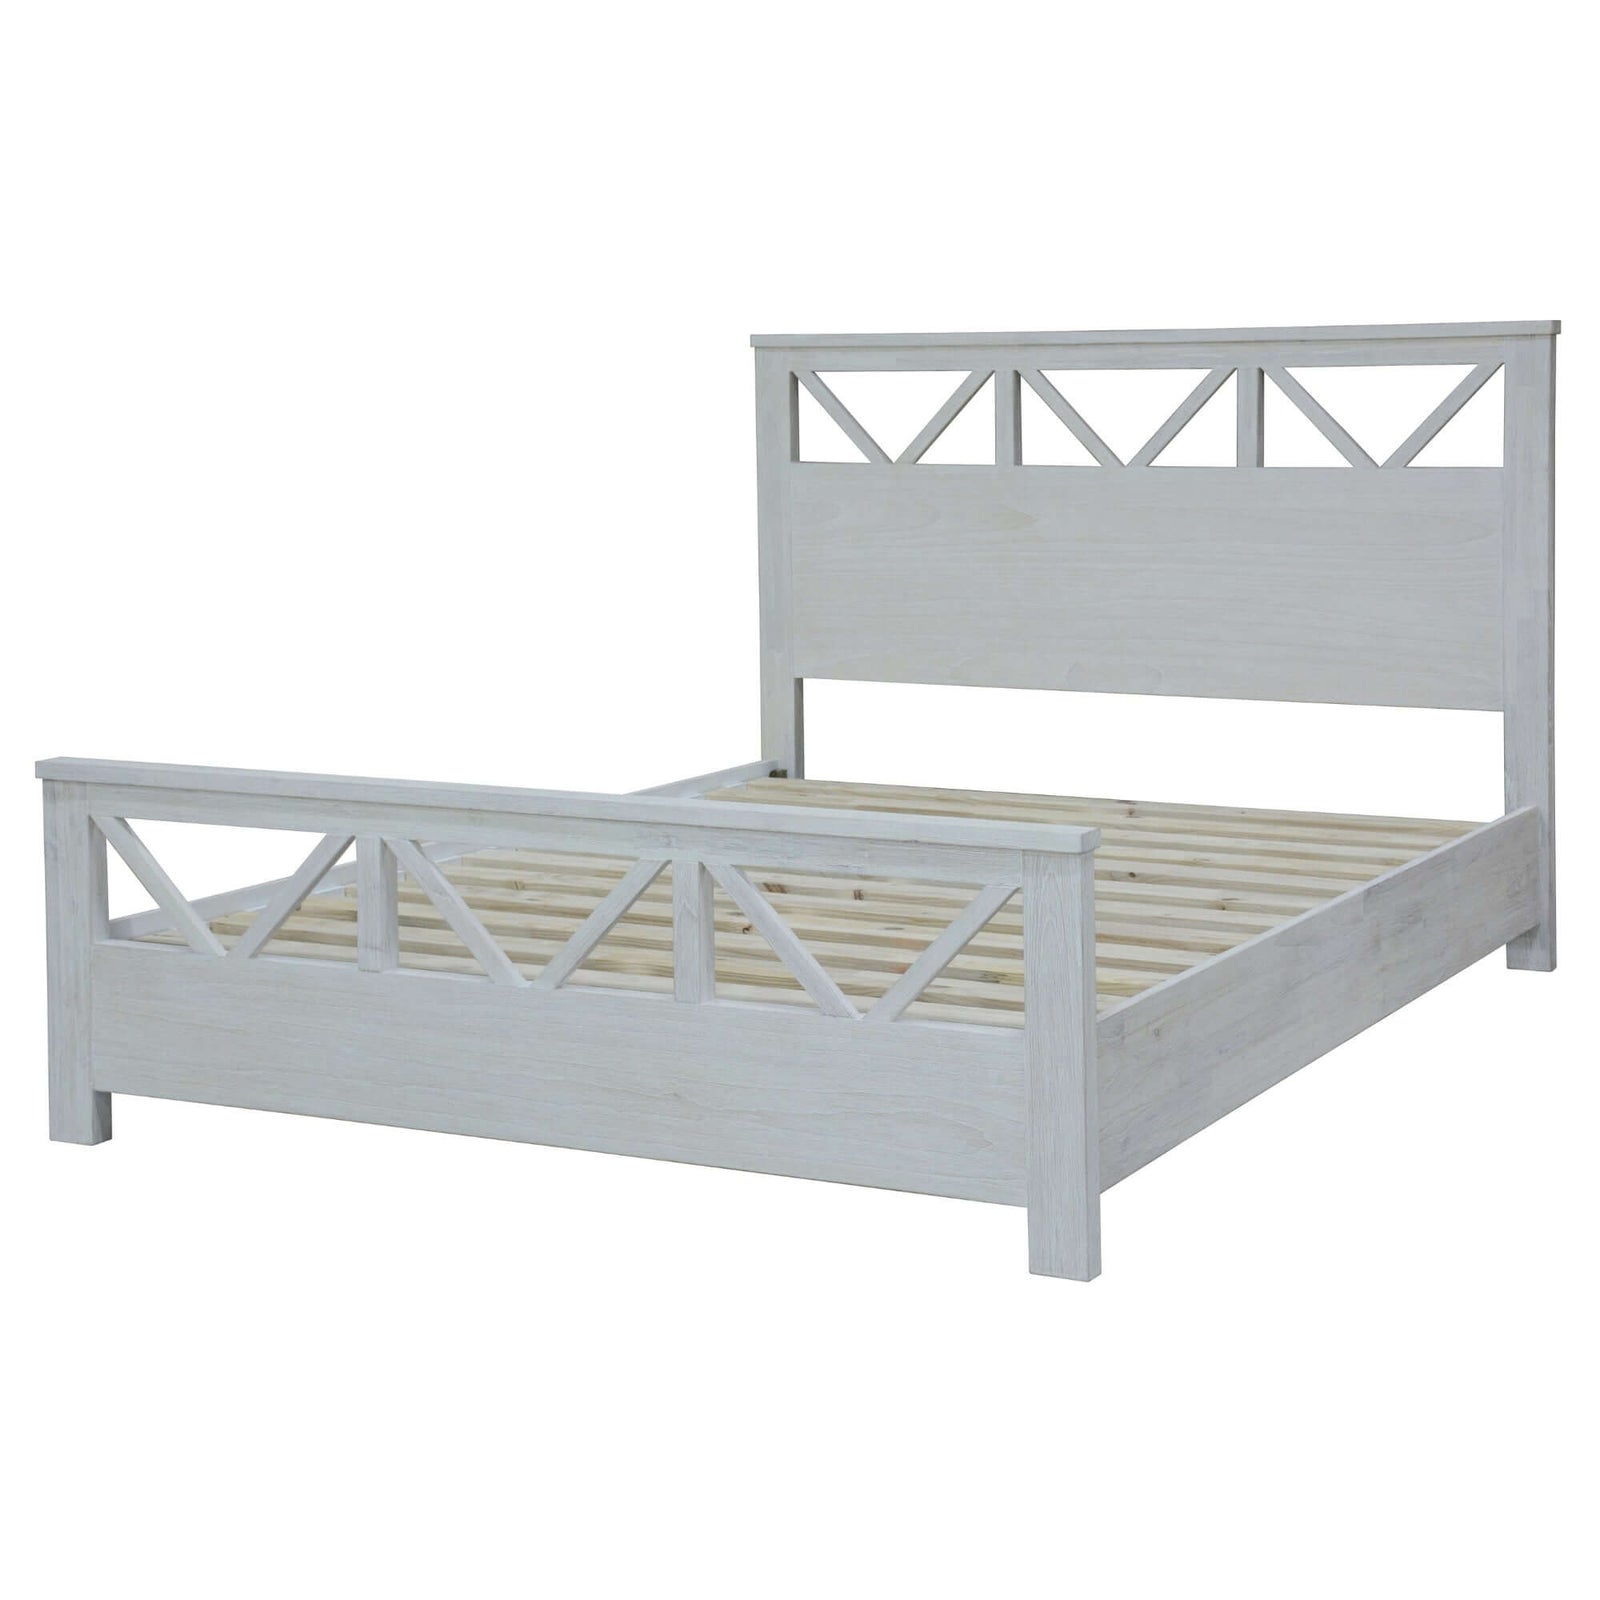 Myer Queen Bed Frame - Solid Timber in White Wash-Upinteriors